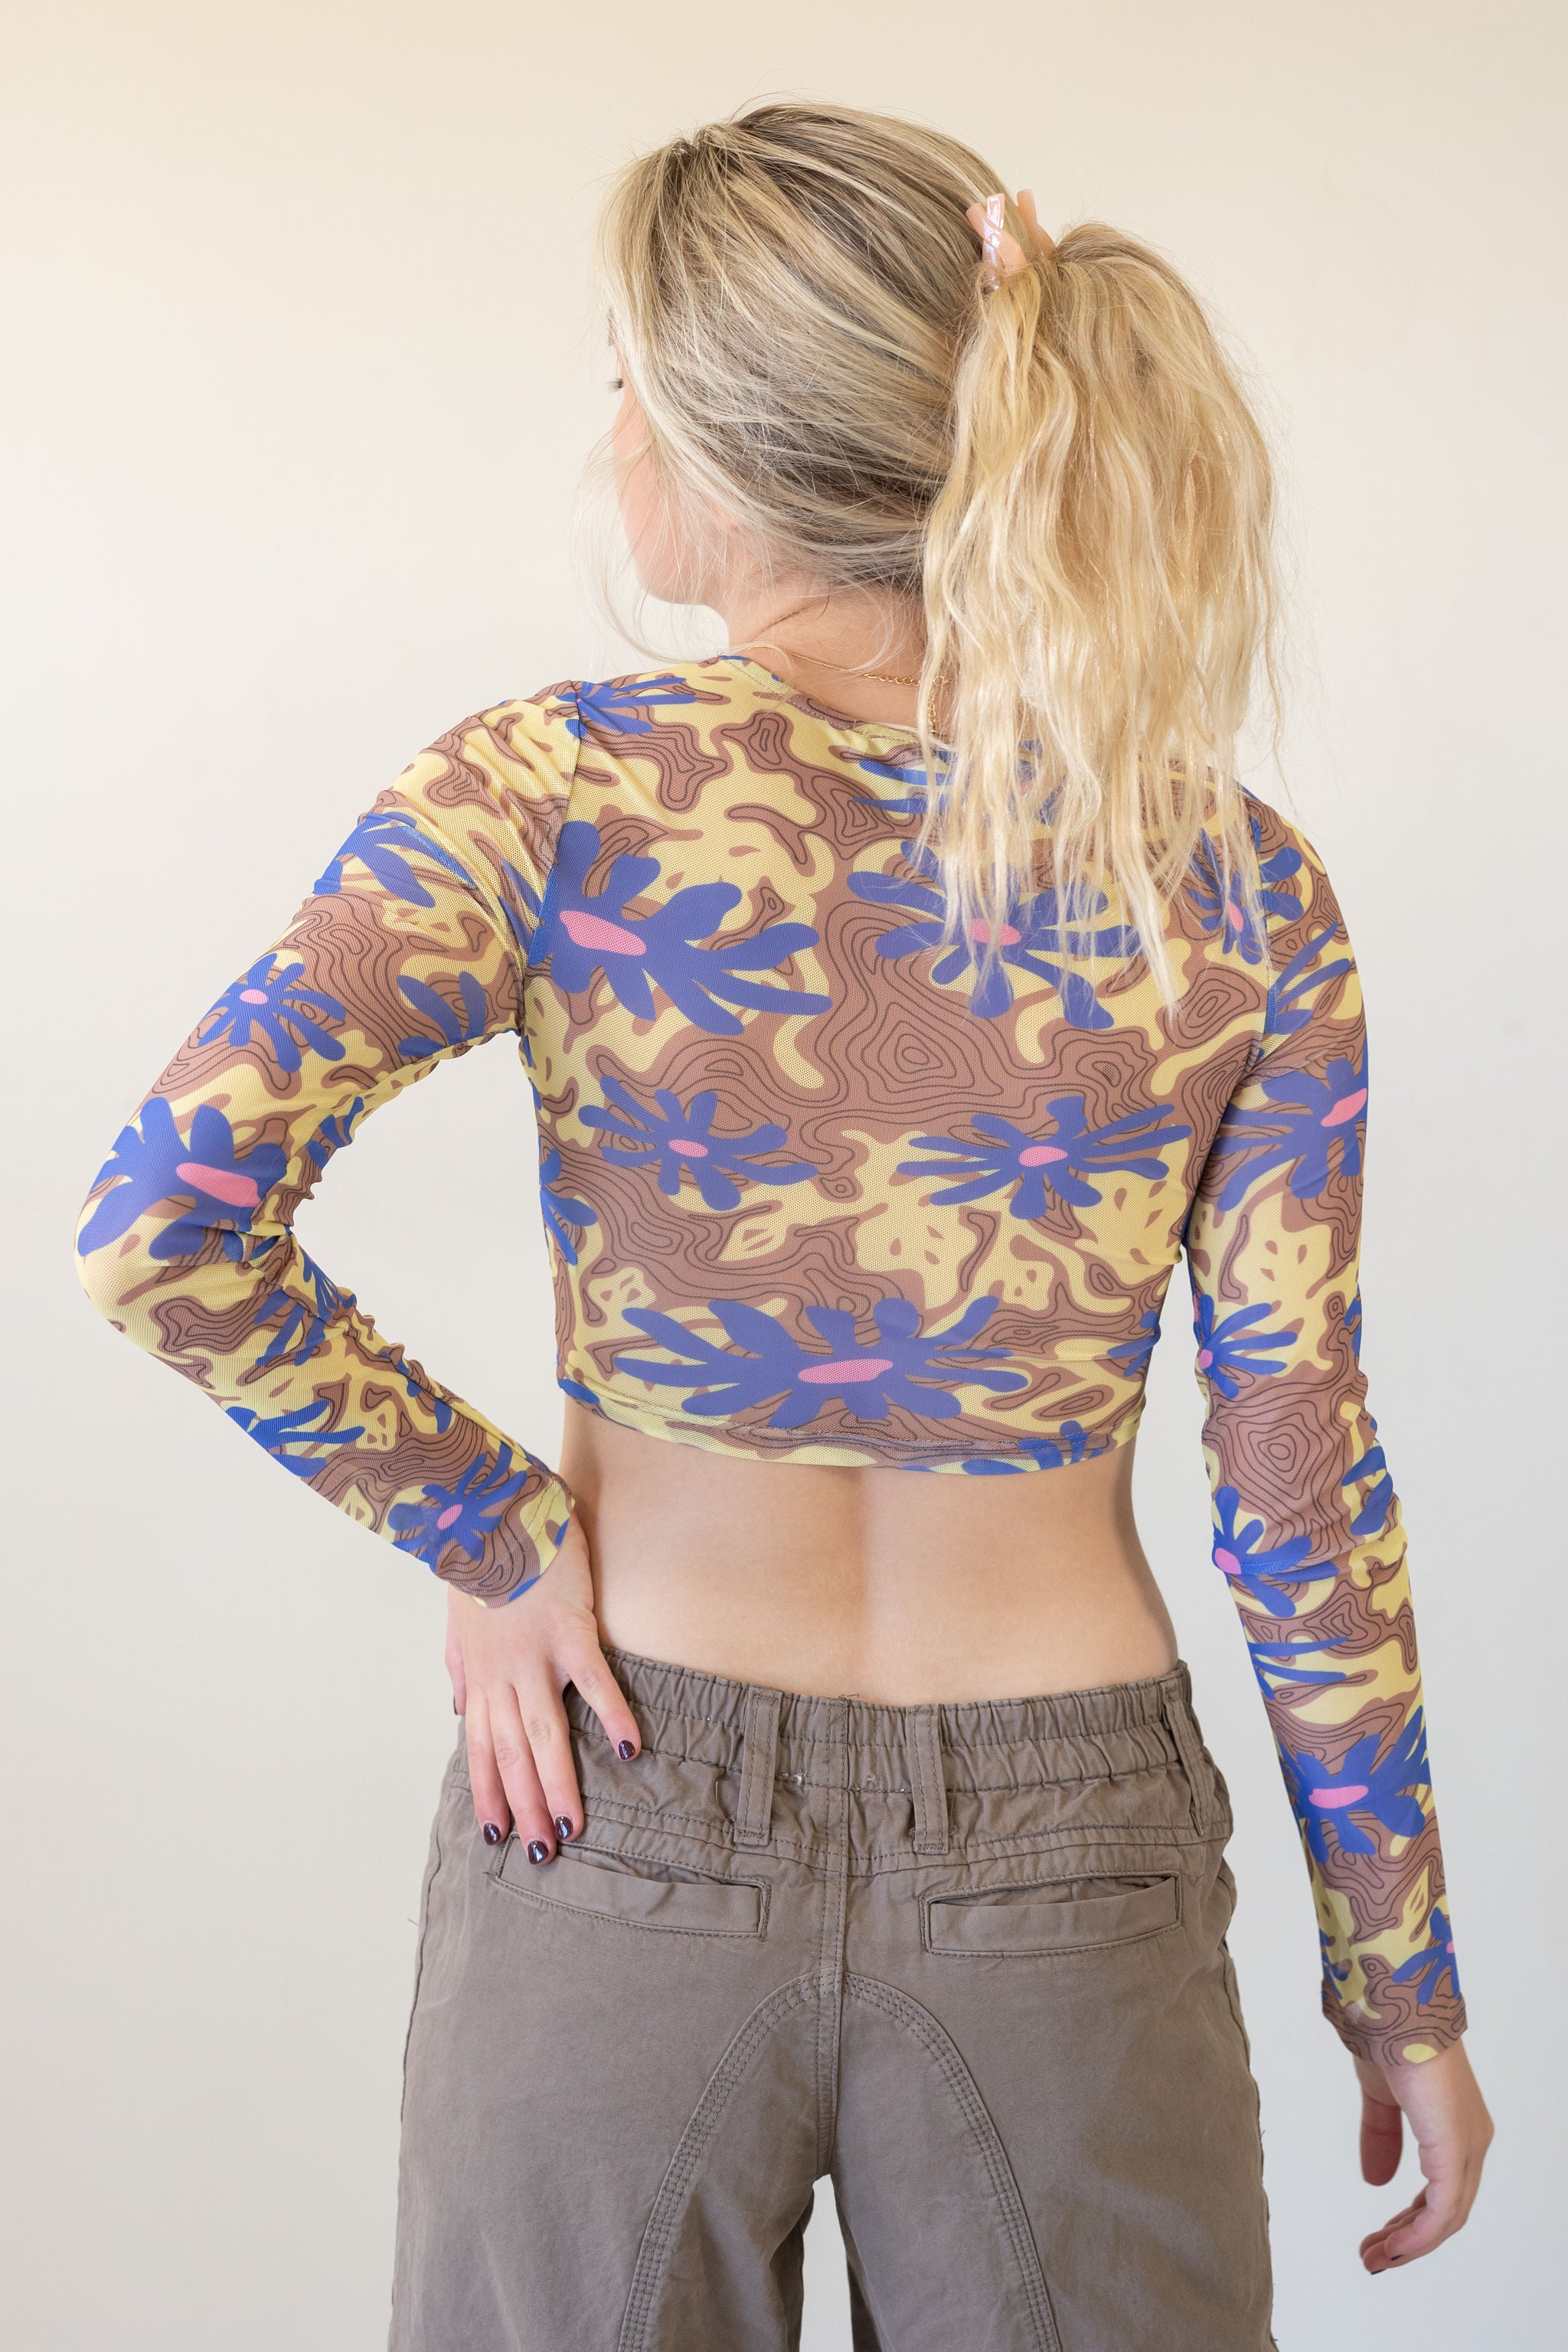 This Heart Long Sleeve Floral Crop Top